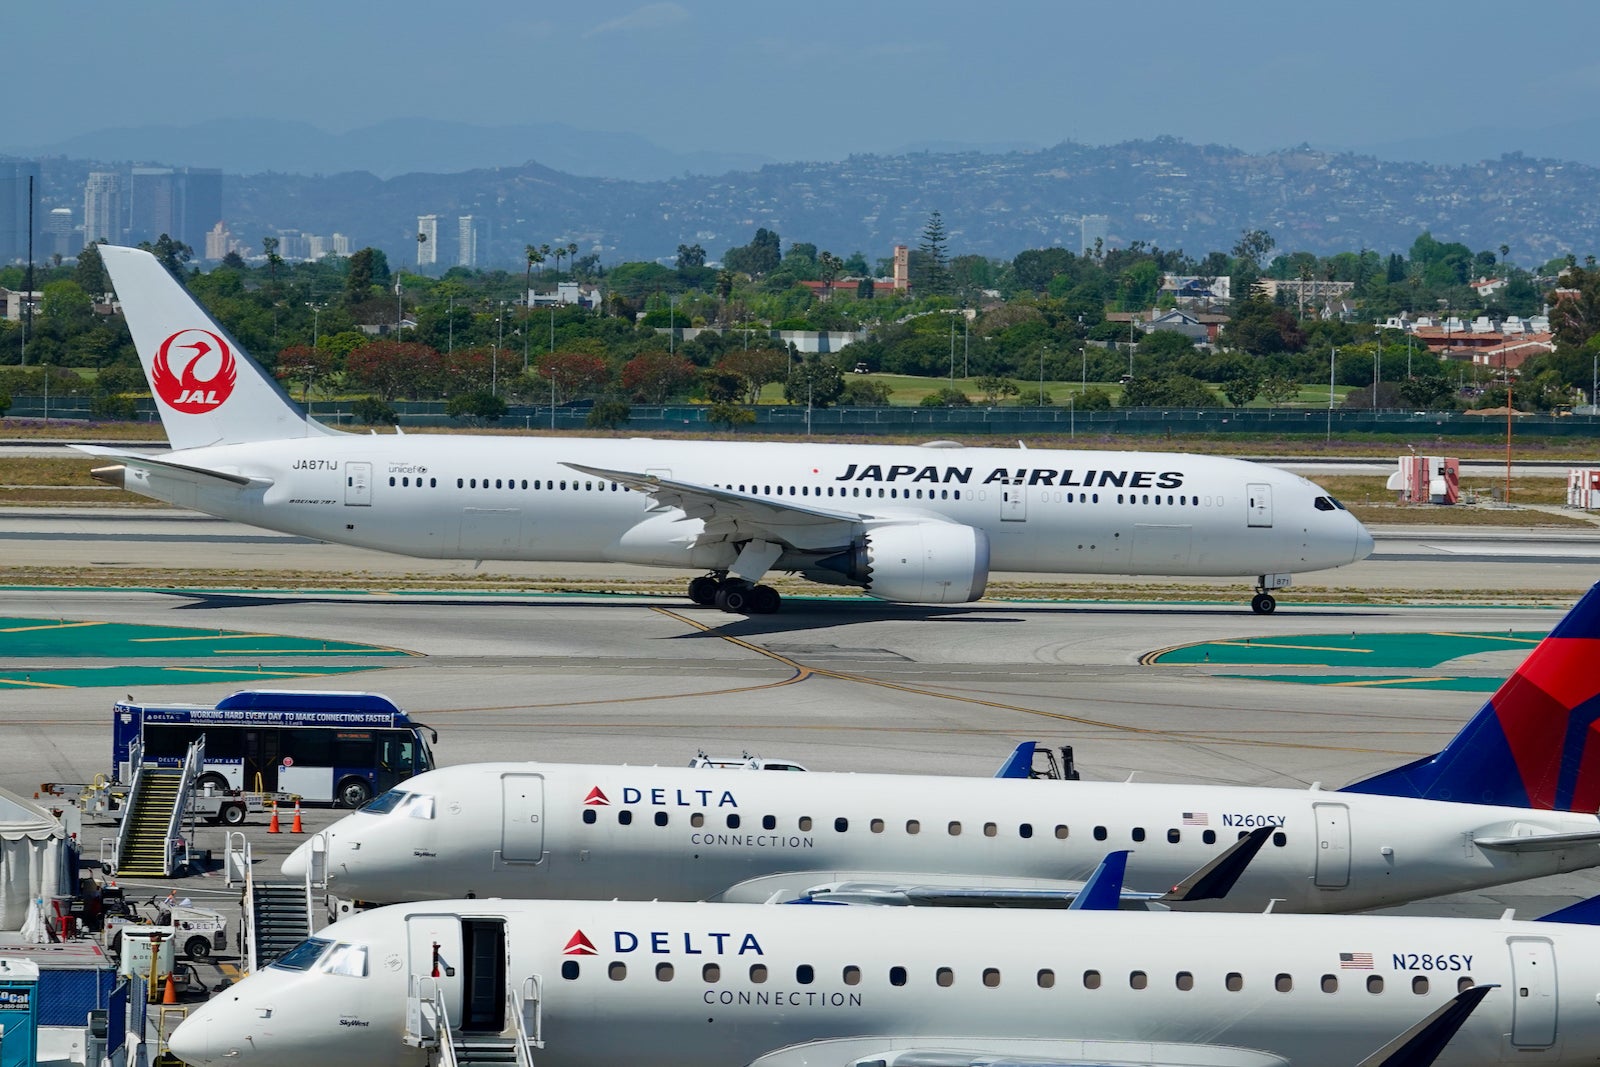 Japan Airlines and Delta Air Lines planes on tarmac